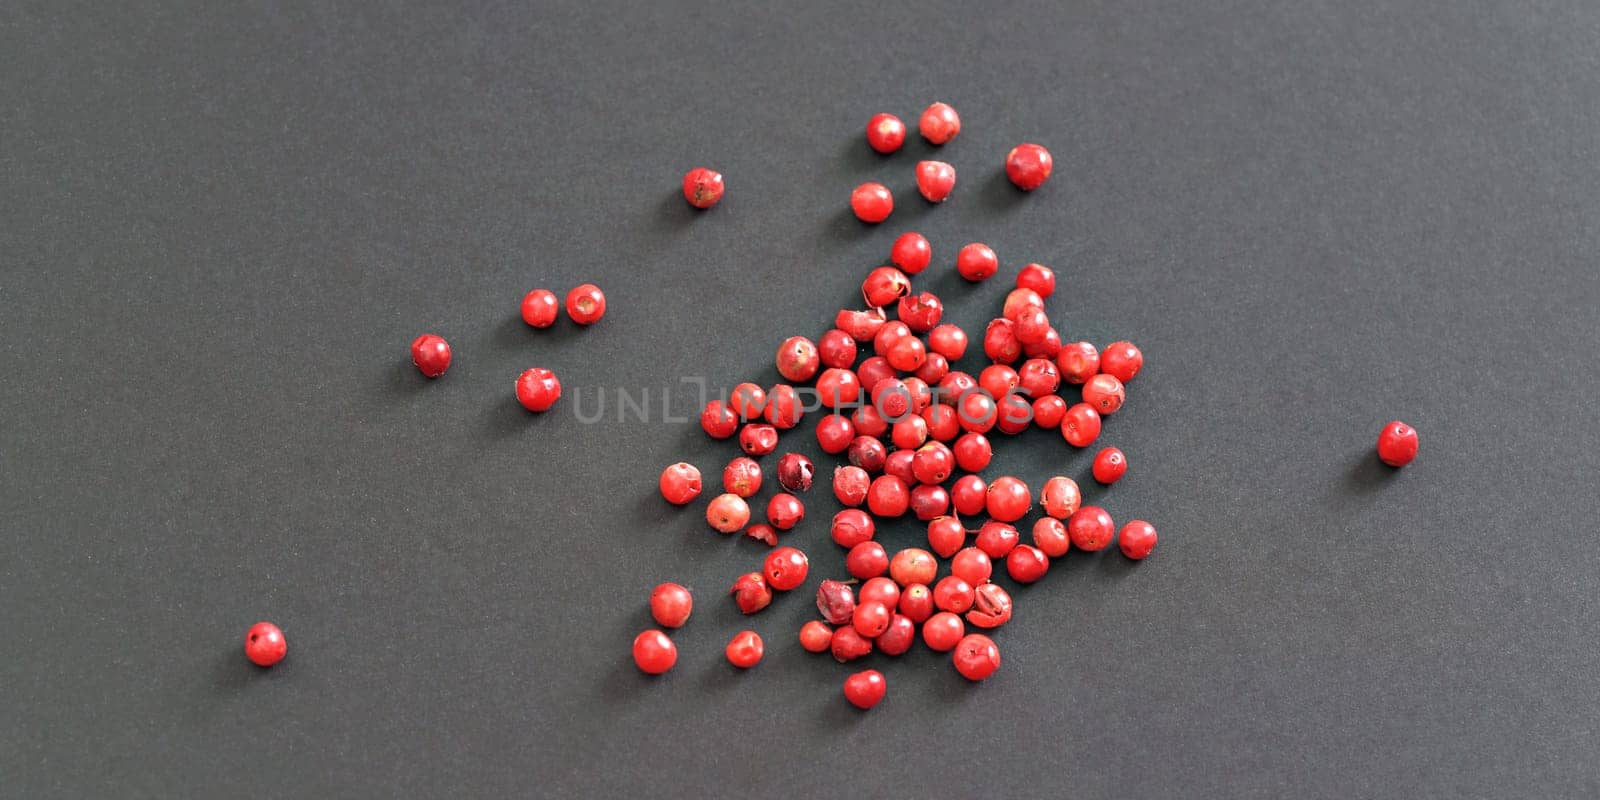 Whole pink / red peppercorns on black / gray paper, view from above